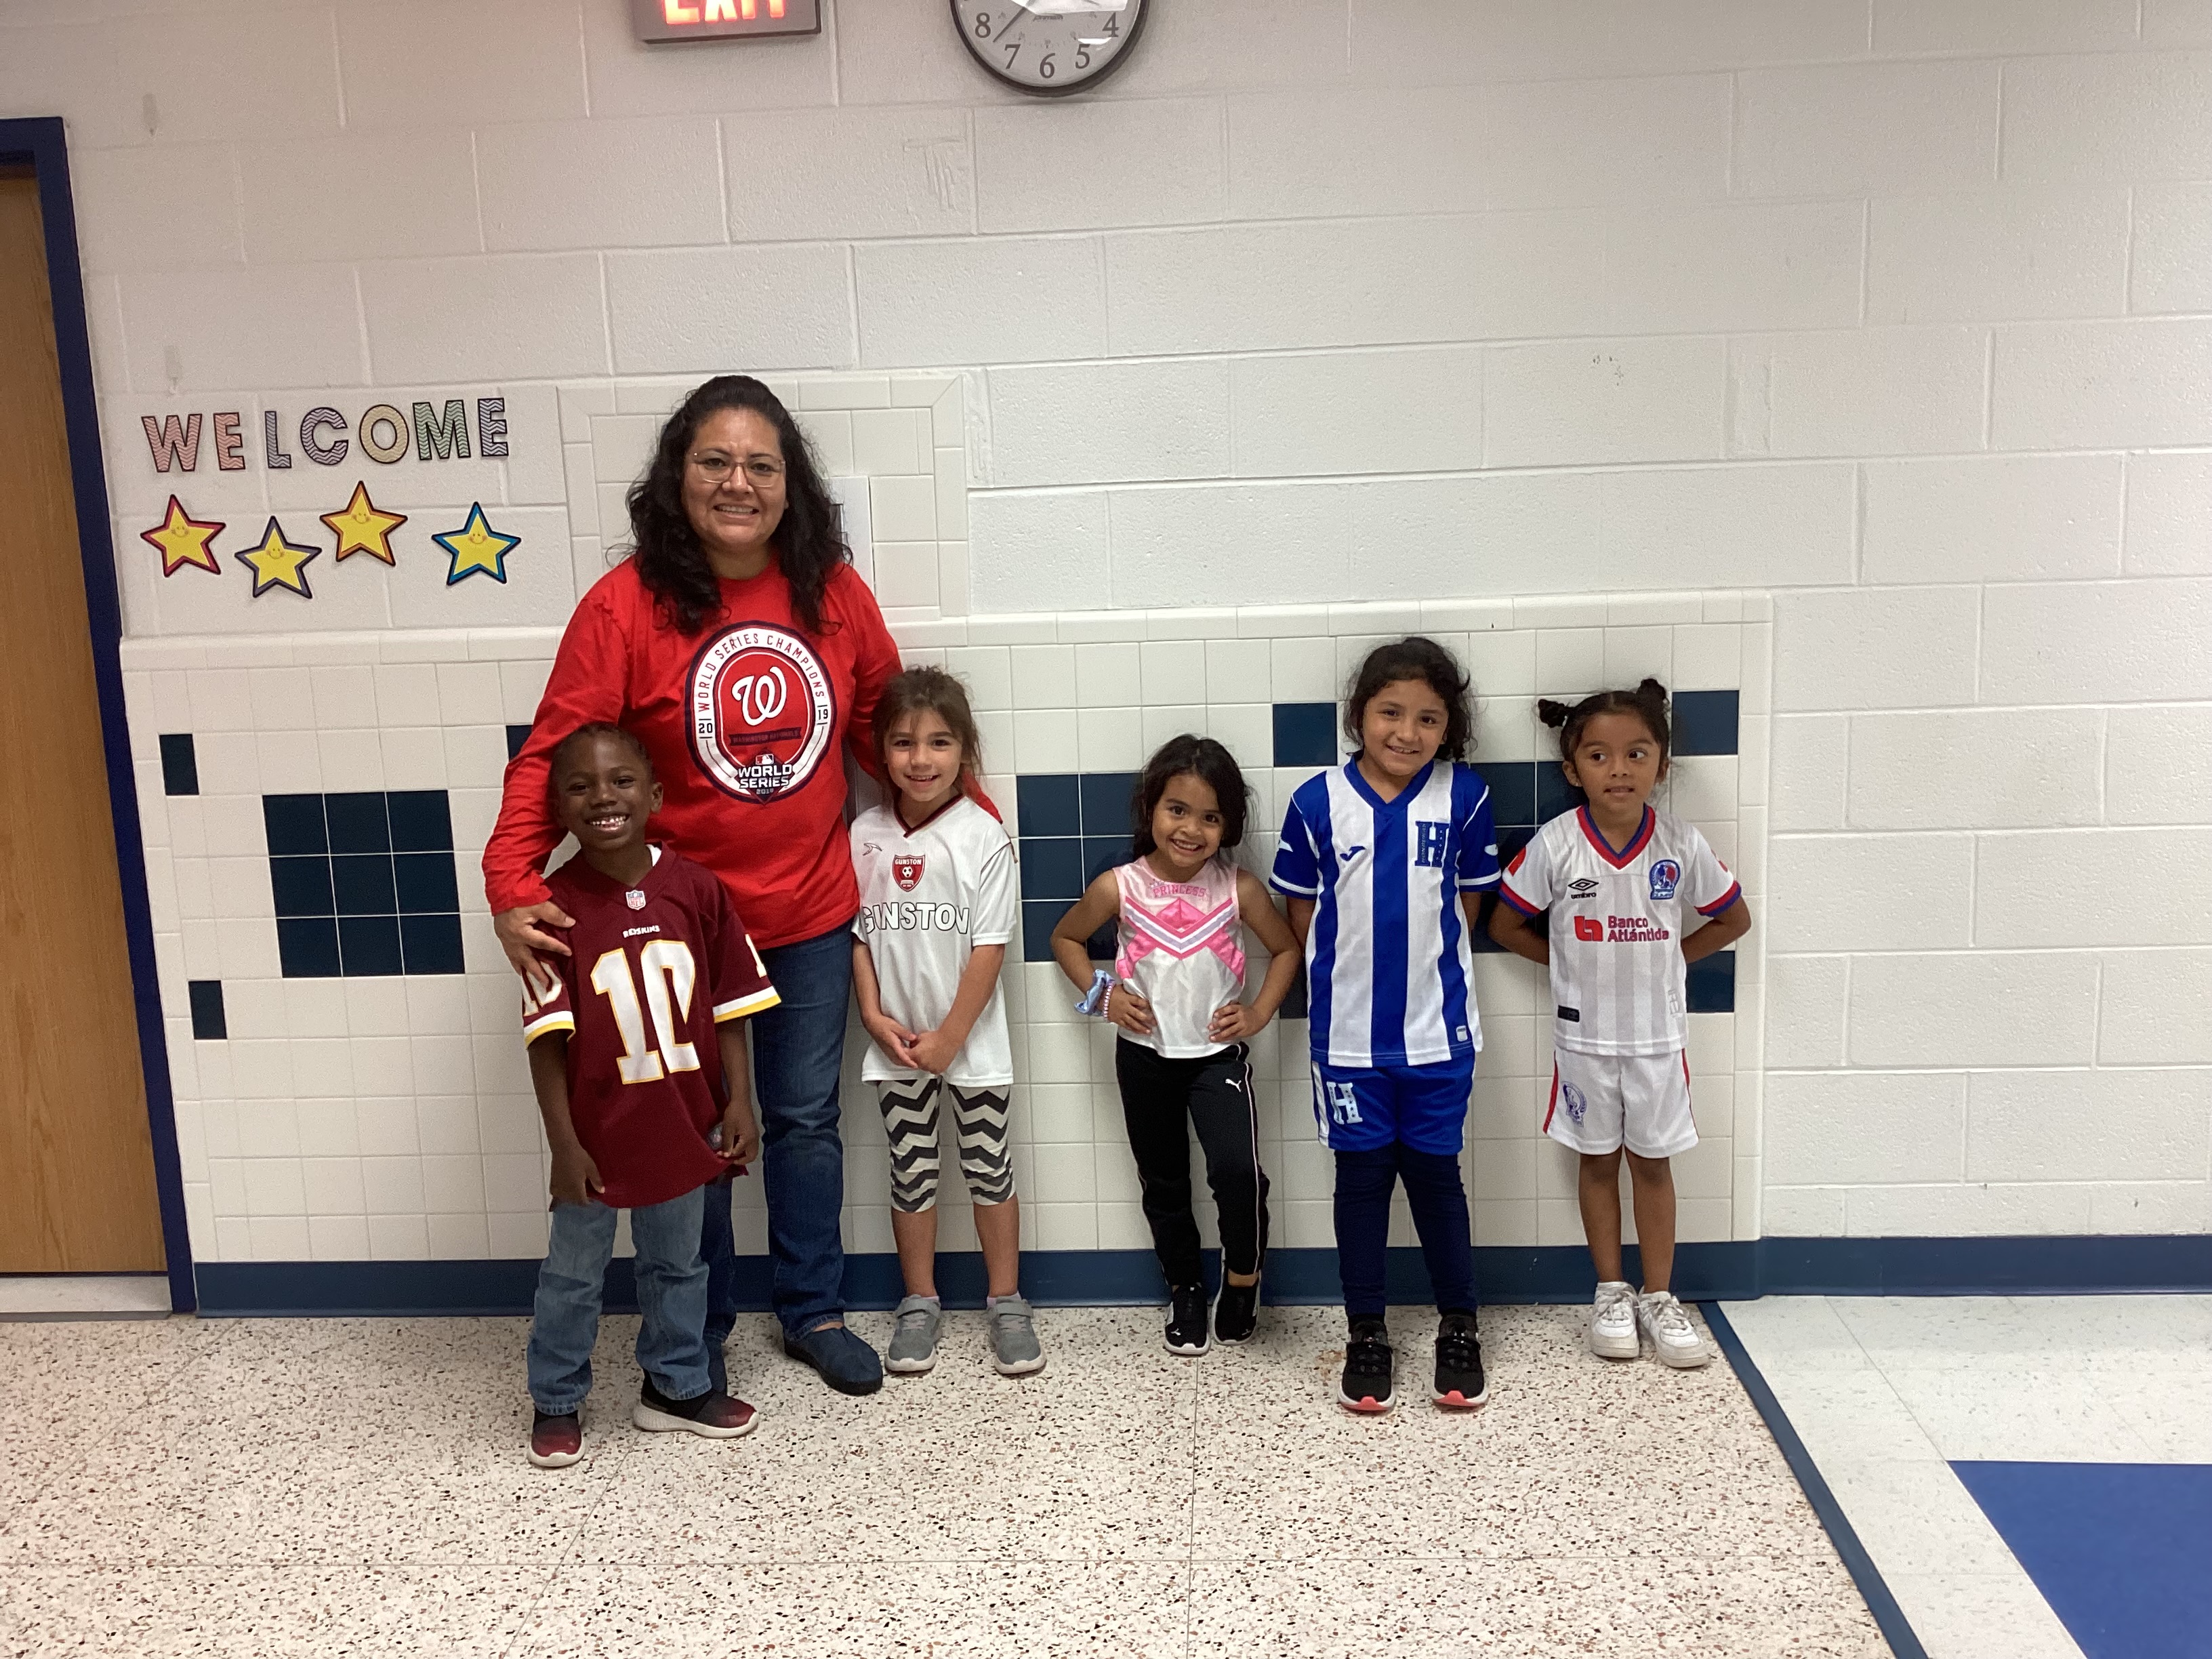 Sports Day - Team Up for Digital Citizenship